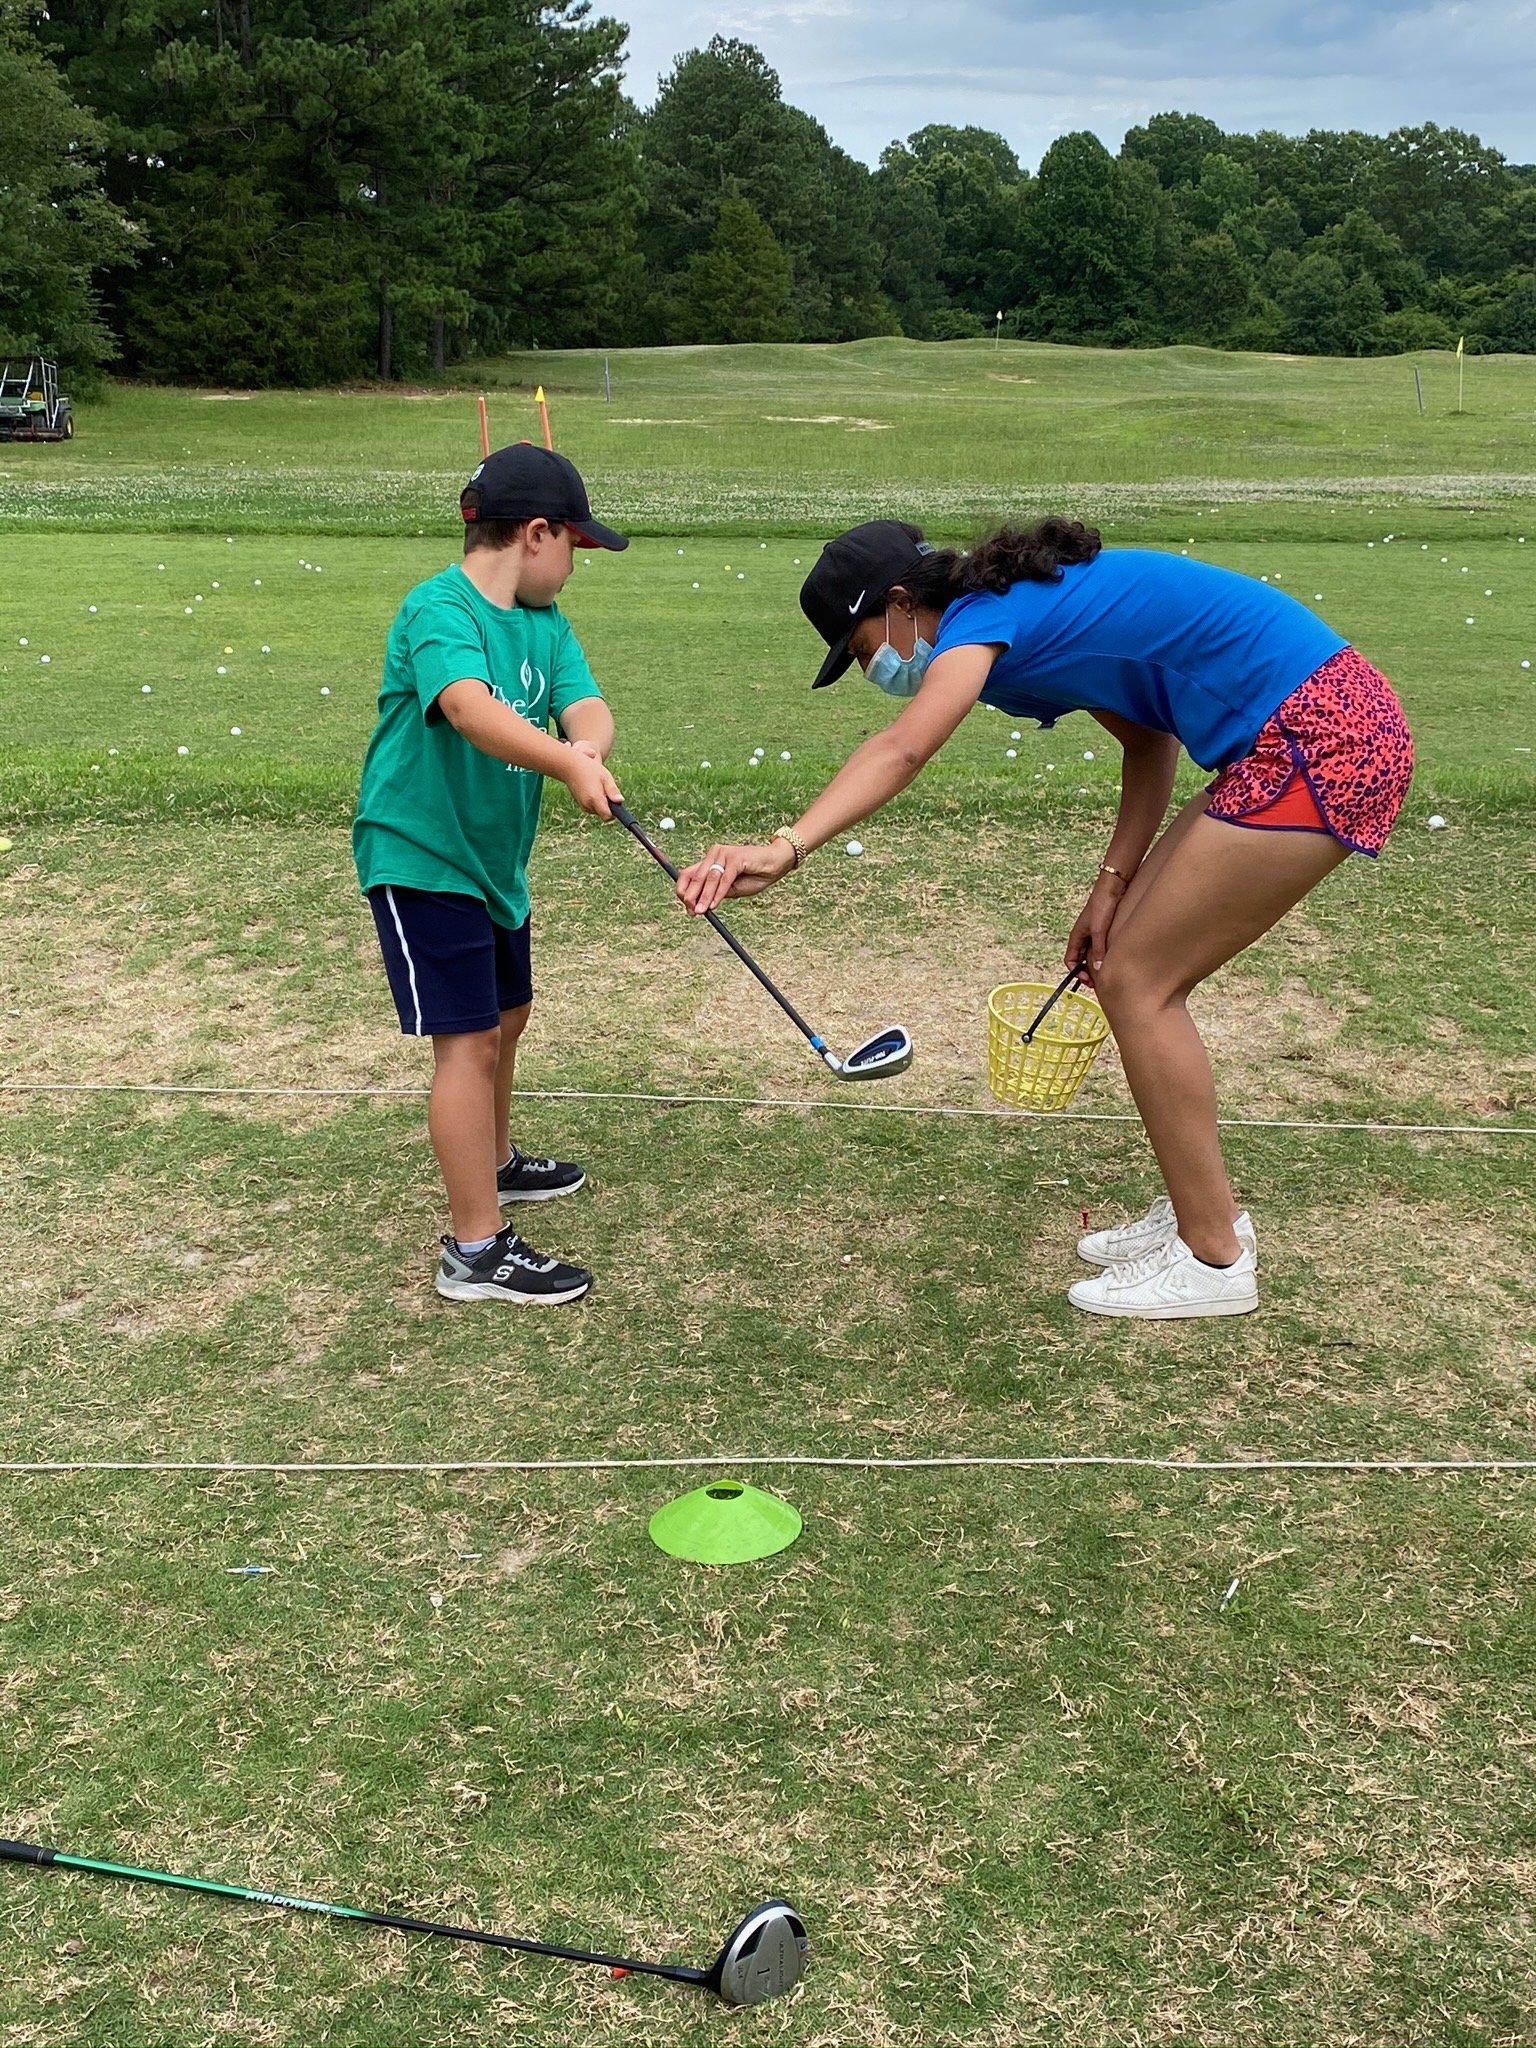 A young woman bends down to teach a boy how to swing a golf club